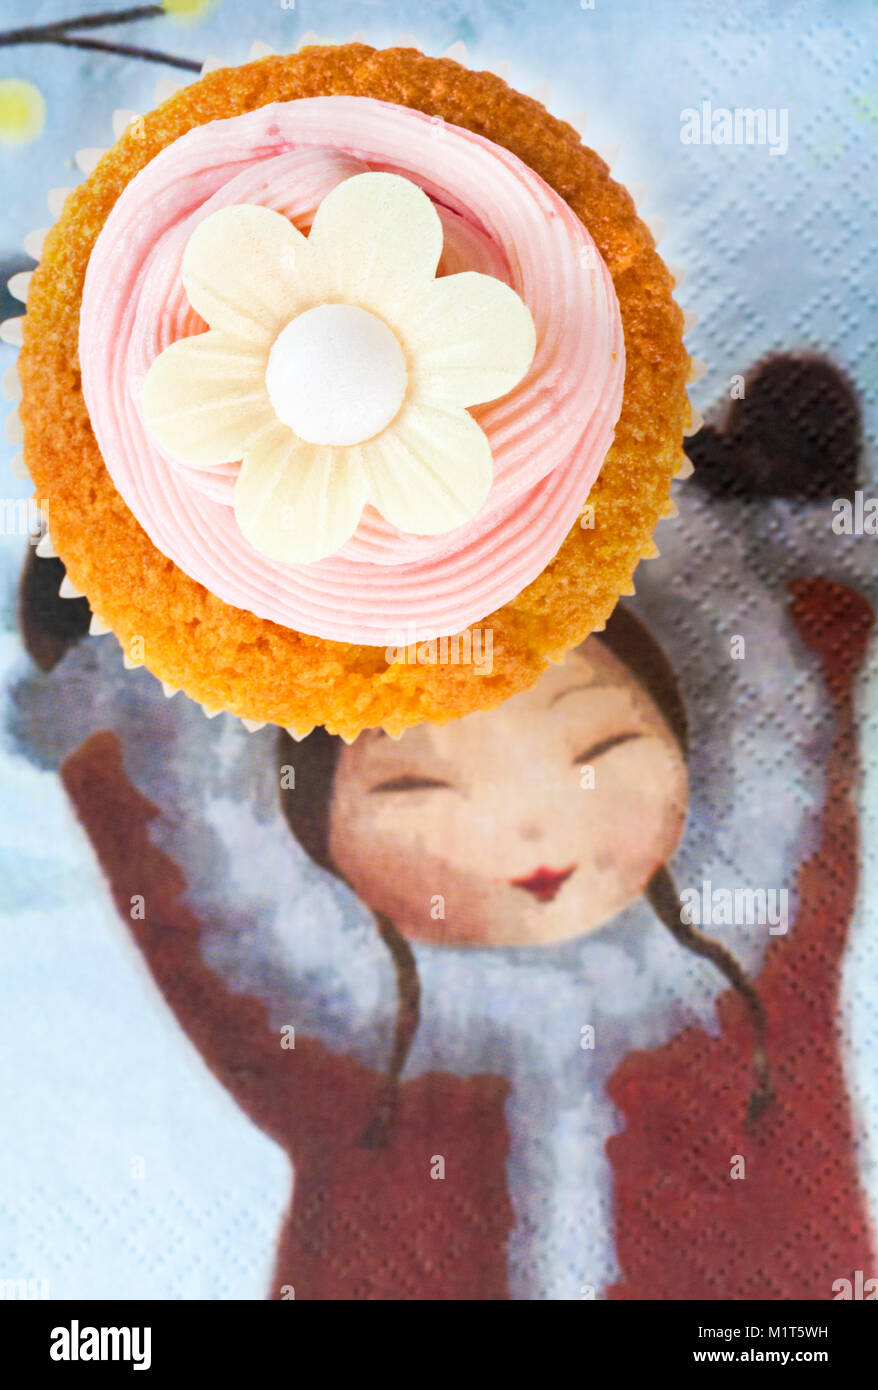 home made cupcake cake with strawberry pink frosting icing and rice paper edible daisy flower on top on serviette with girl holding hands up Stock Photo